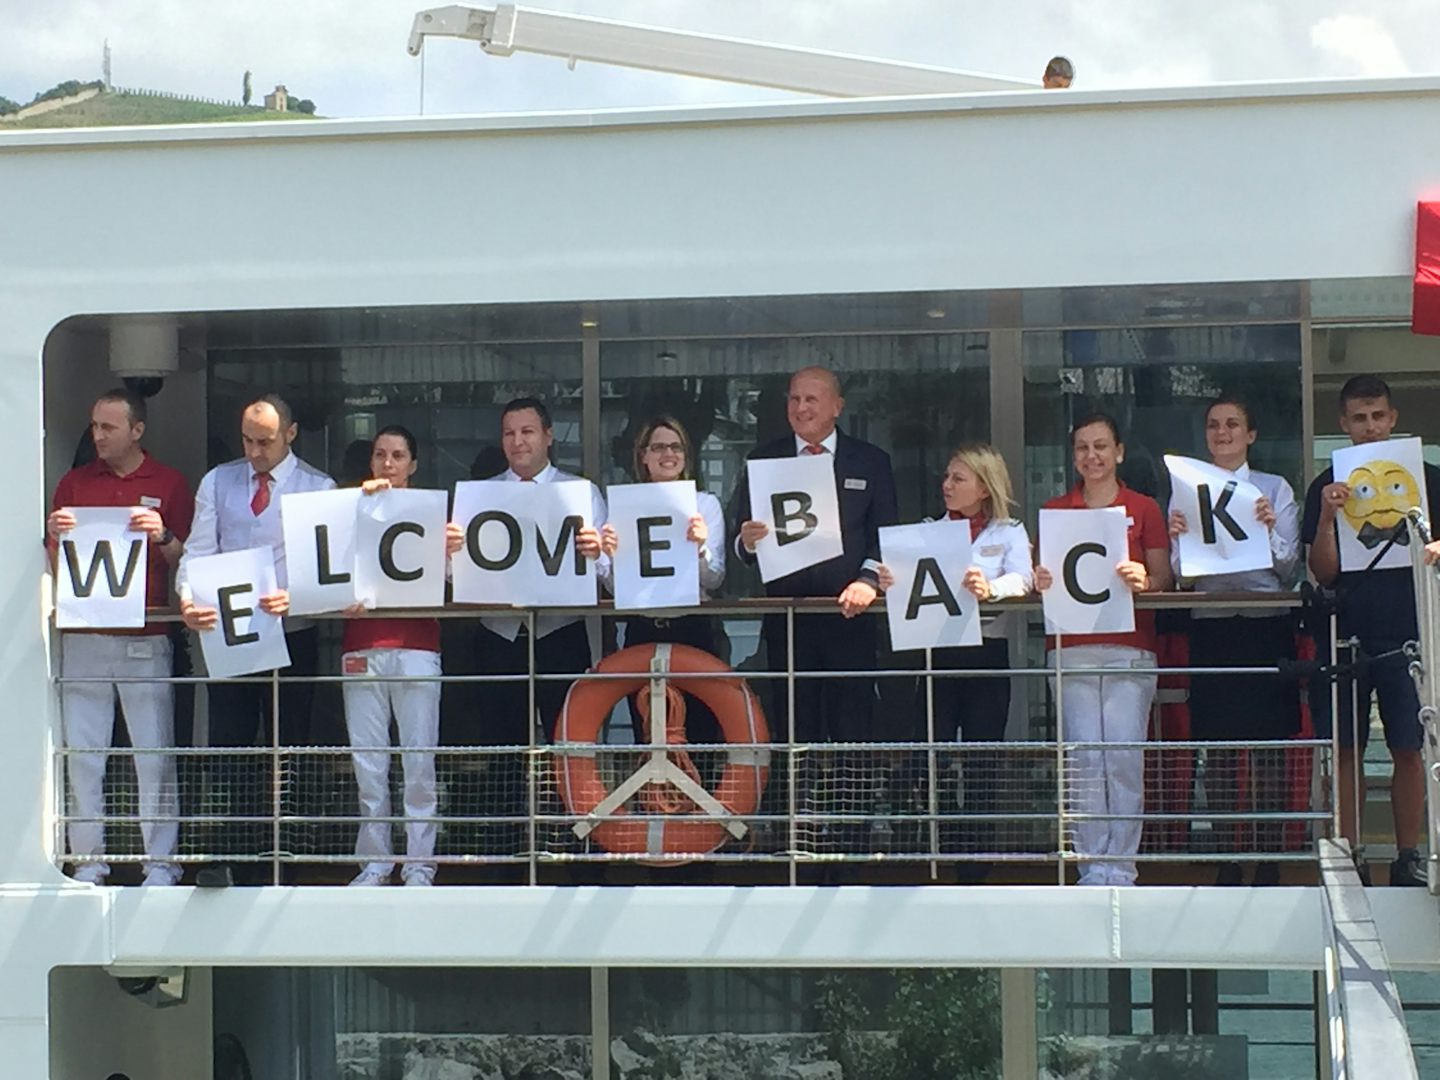 The fantastic crew welcoming us back to the ship after an excursion!